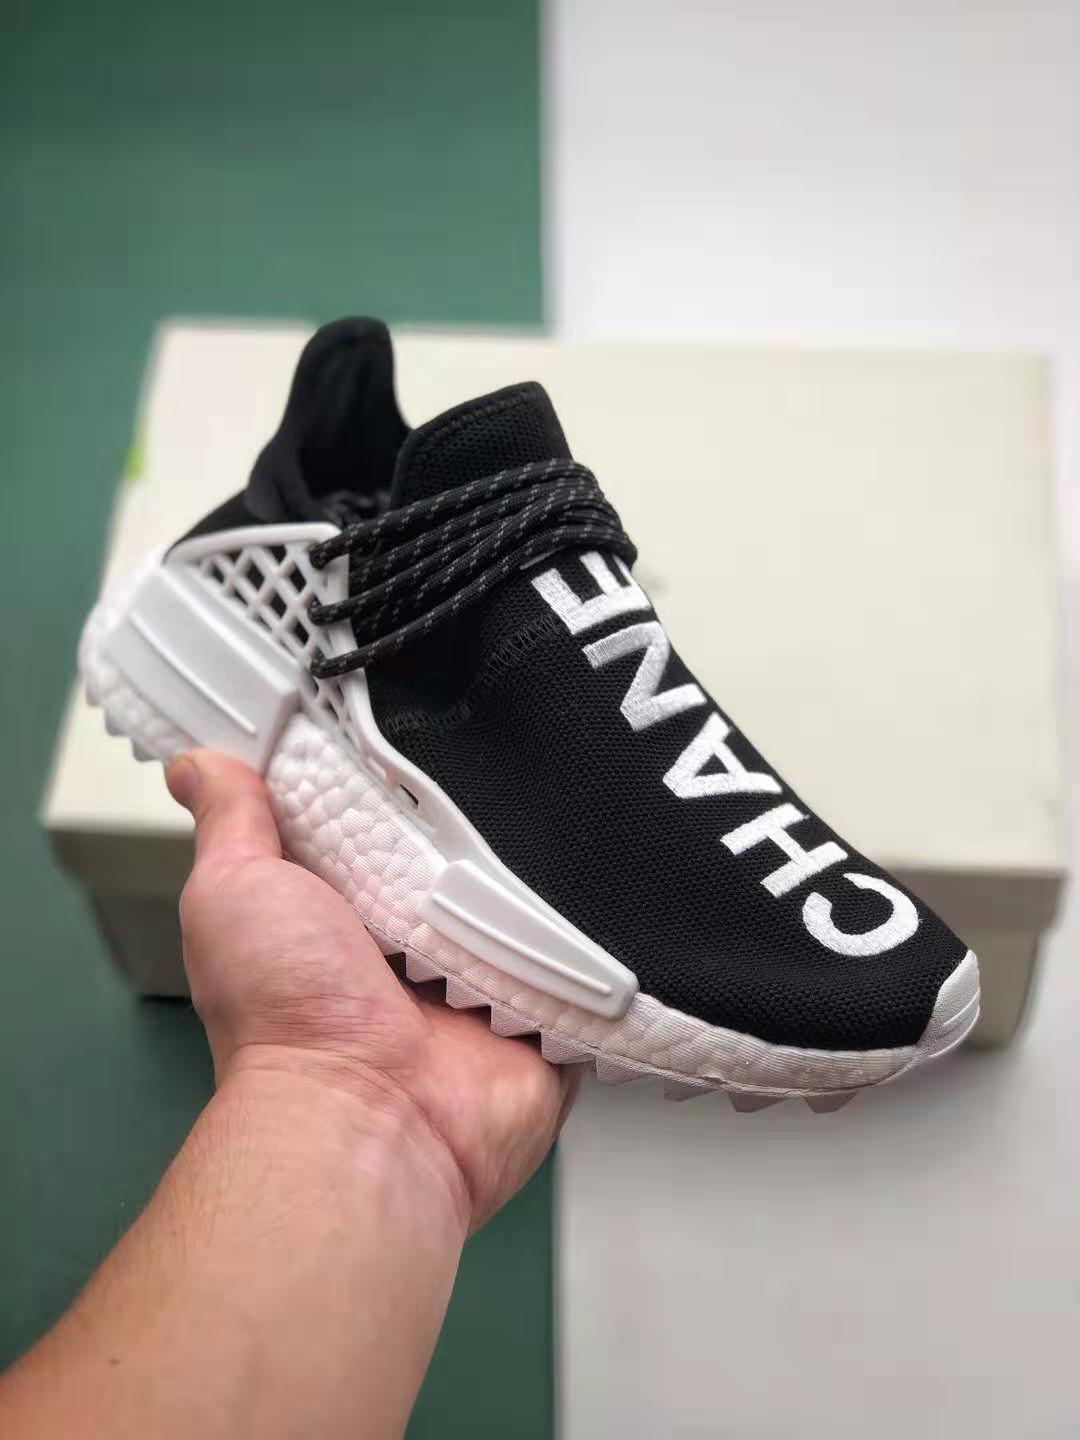 Adidas Pharrell x NMD Human Race Trail 'BBC' BB9544 | Stylish Collaboration for Sneaker Enthusiasts